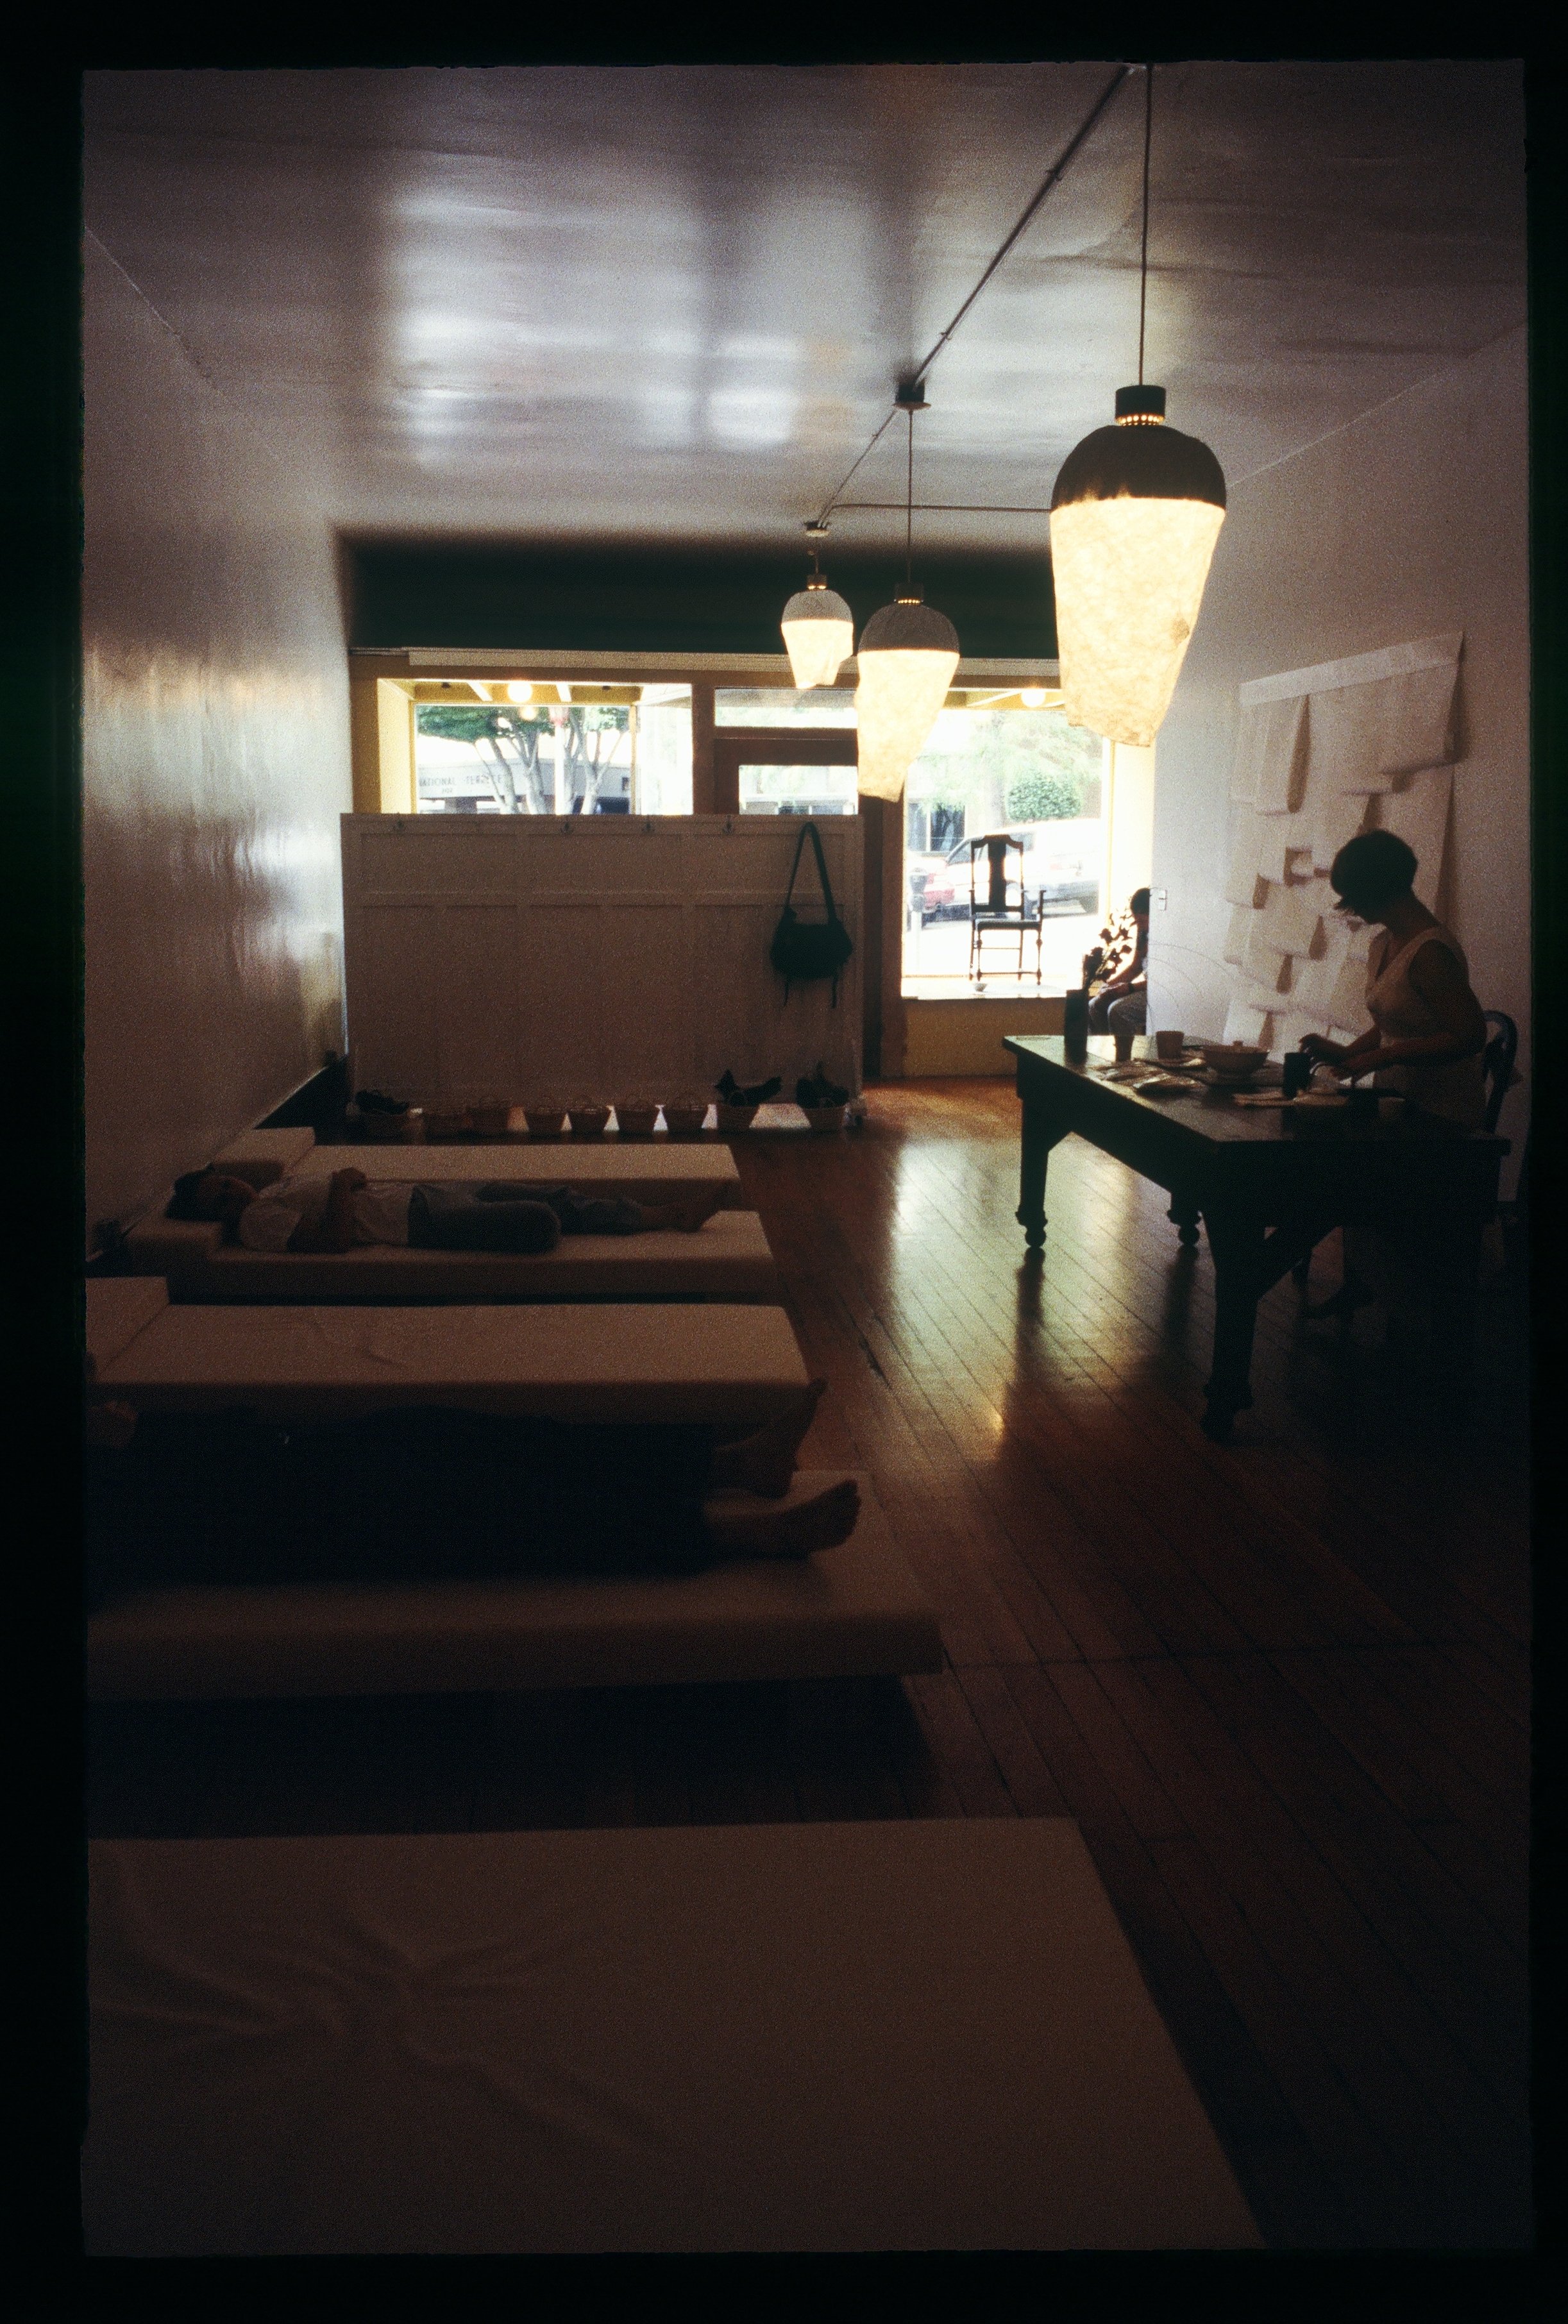 Respite, Panama hotel with Claire Cowie + Julie Johnson 2003